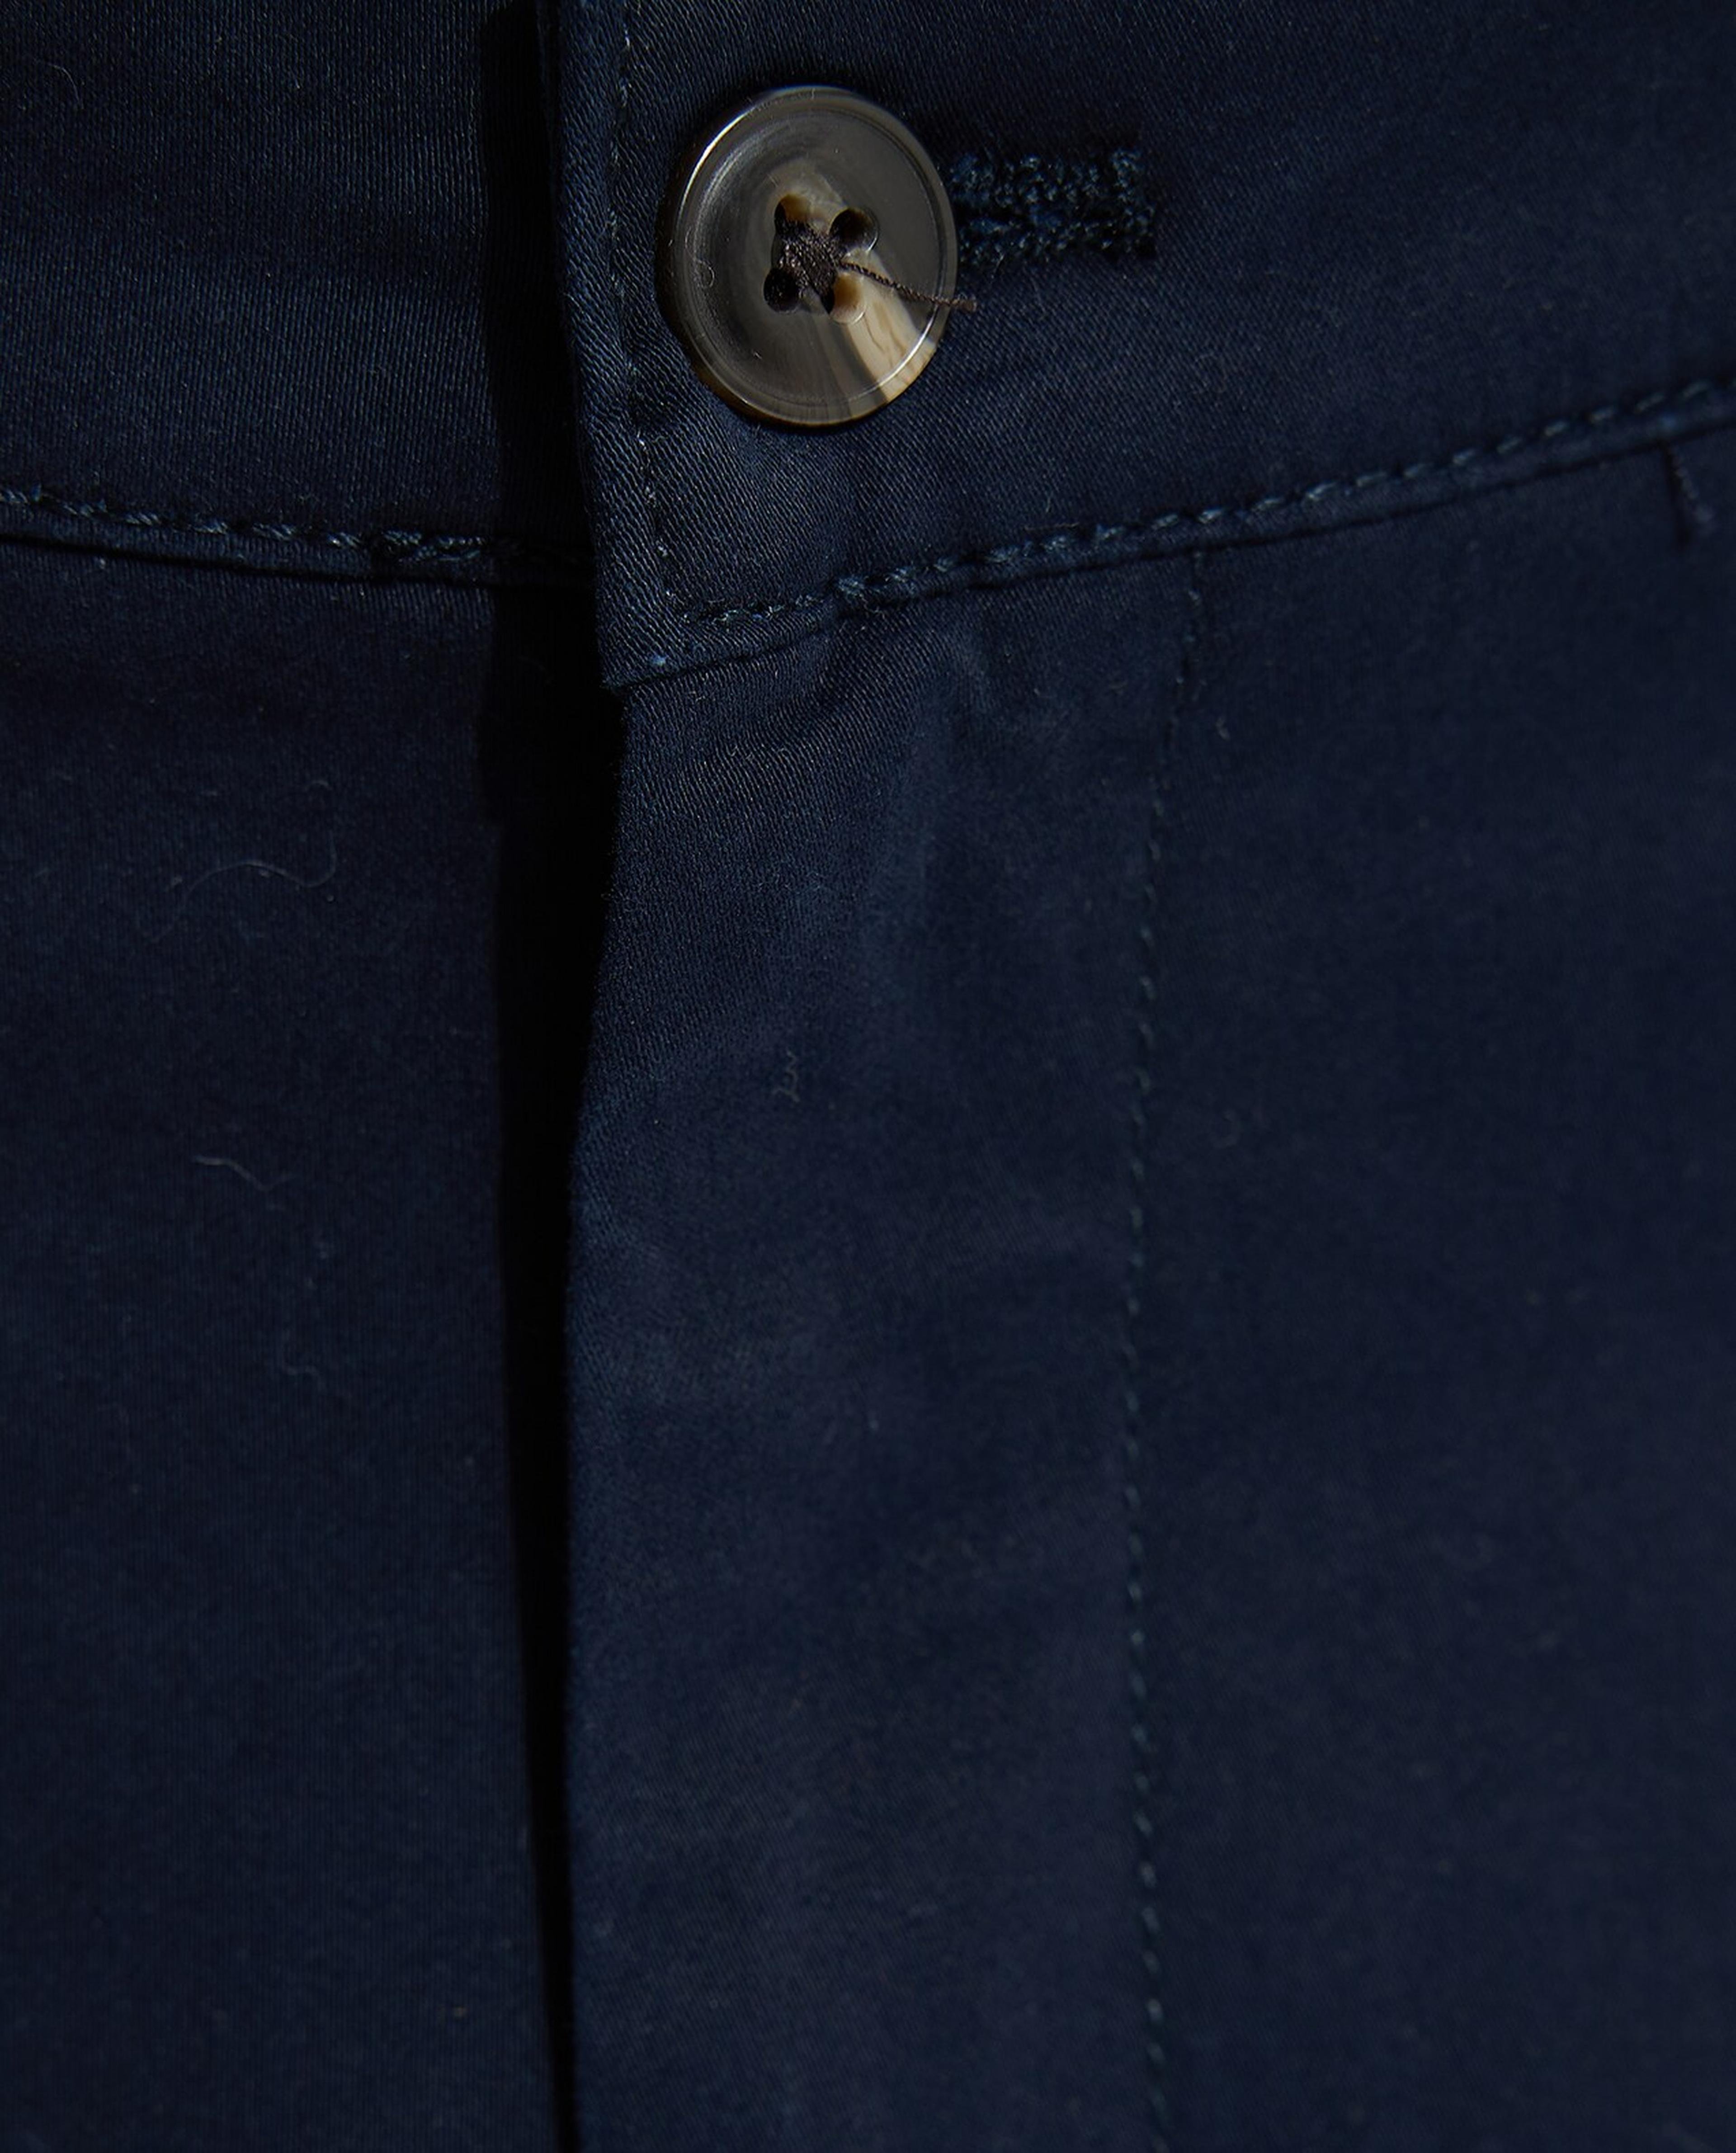 Solid Tapered Fit Pants with Button Closure